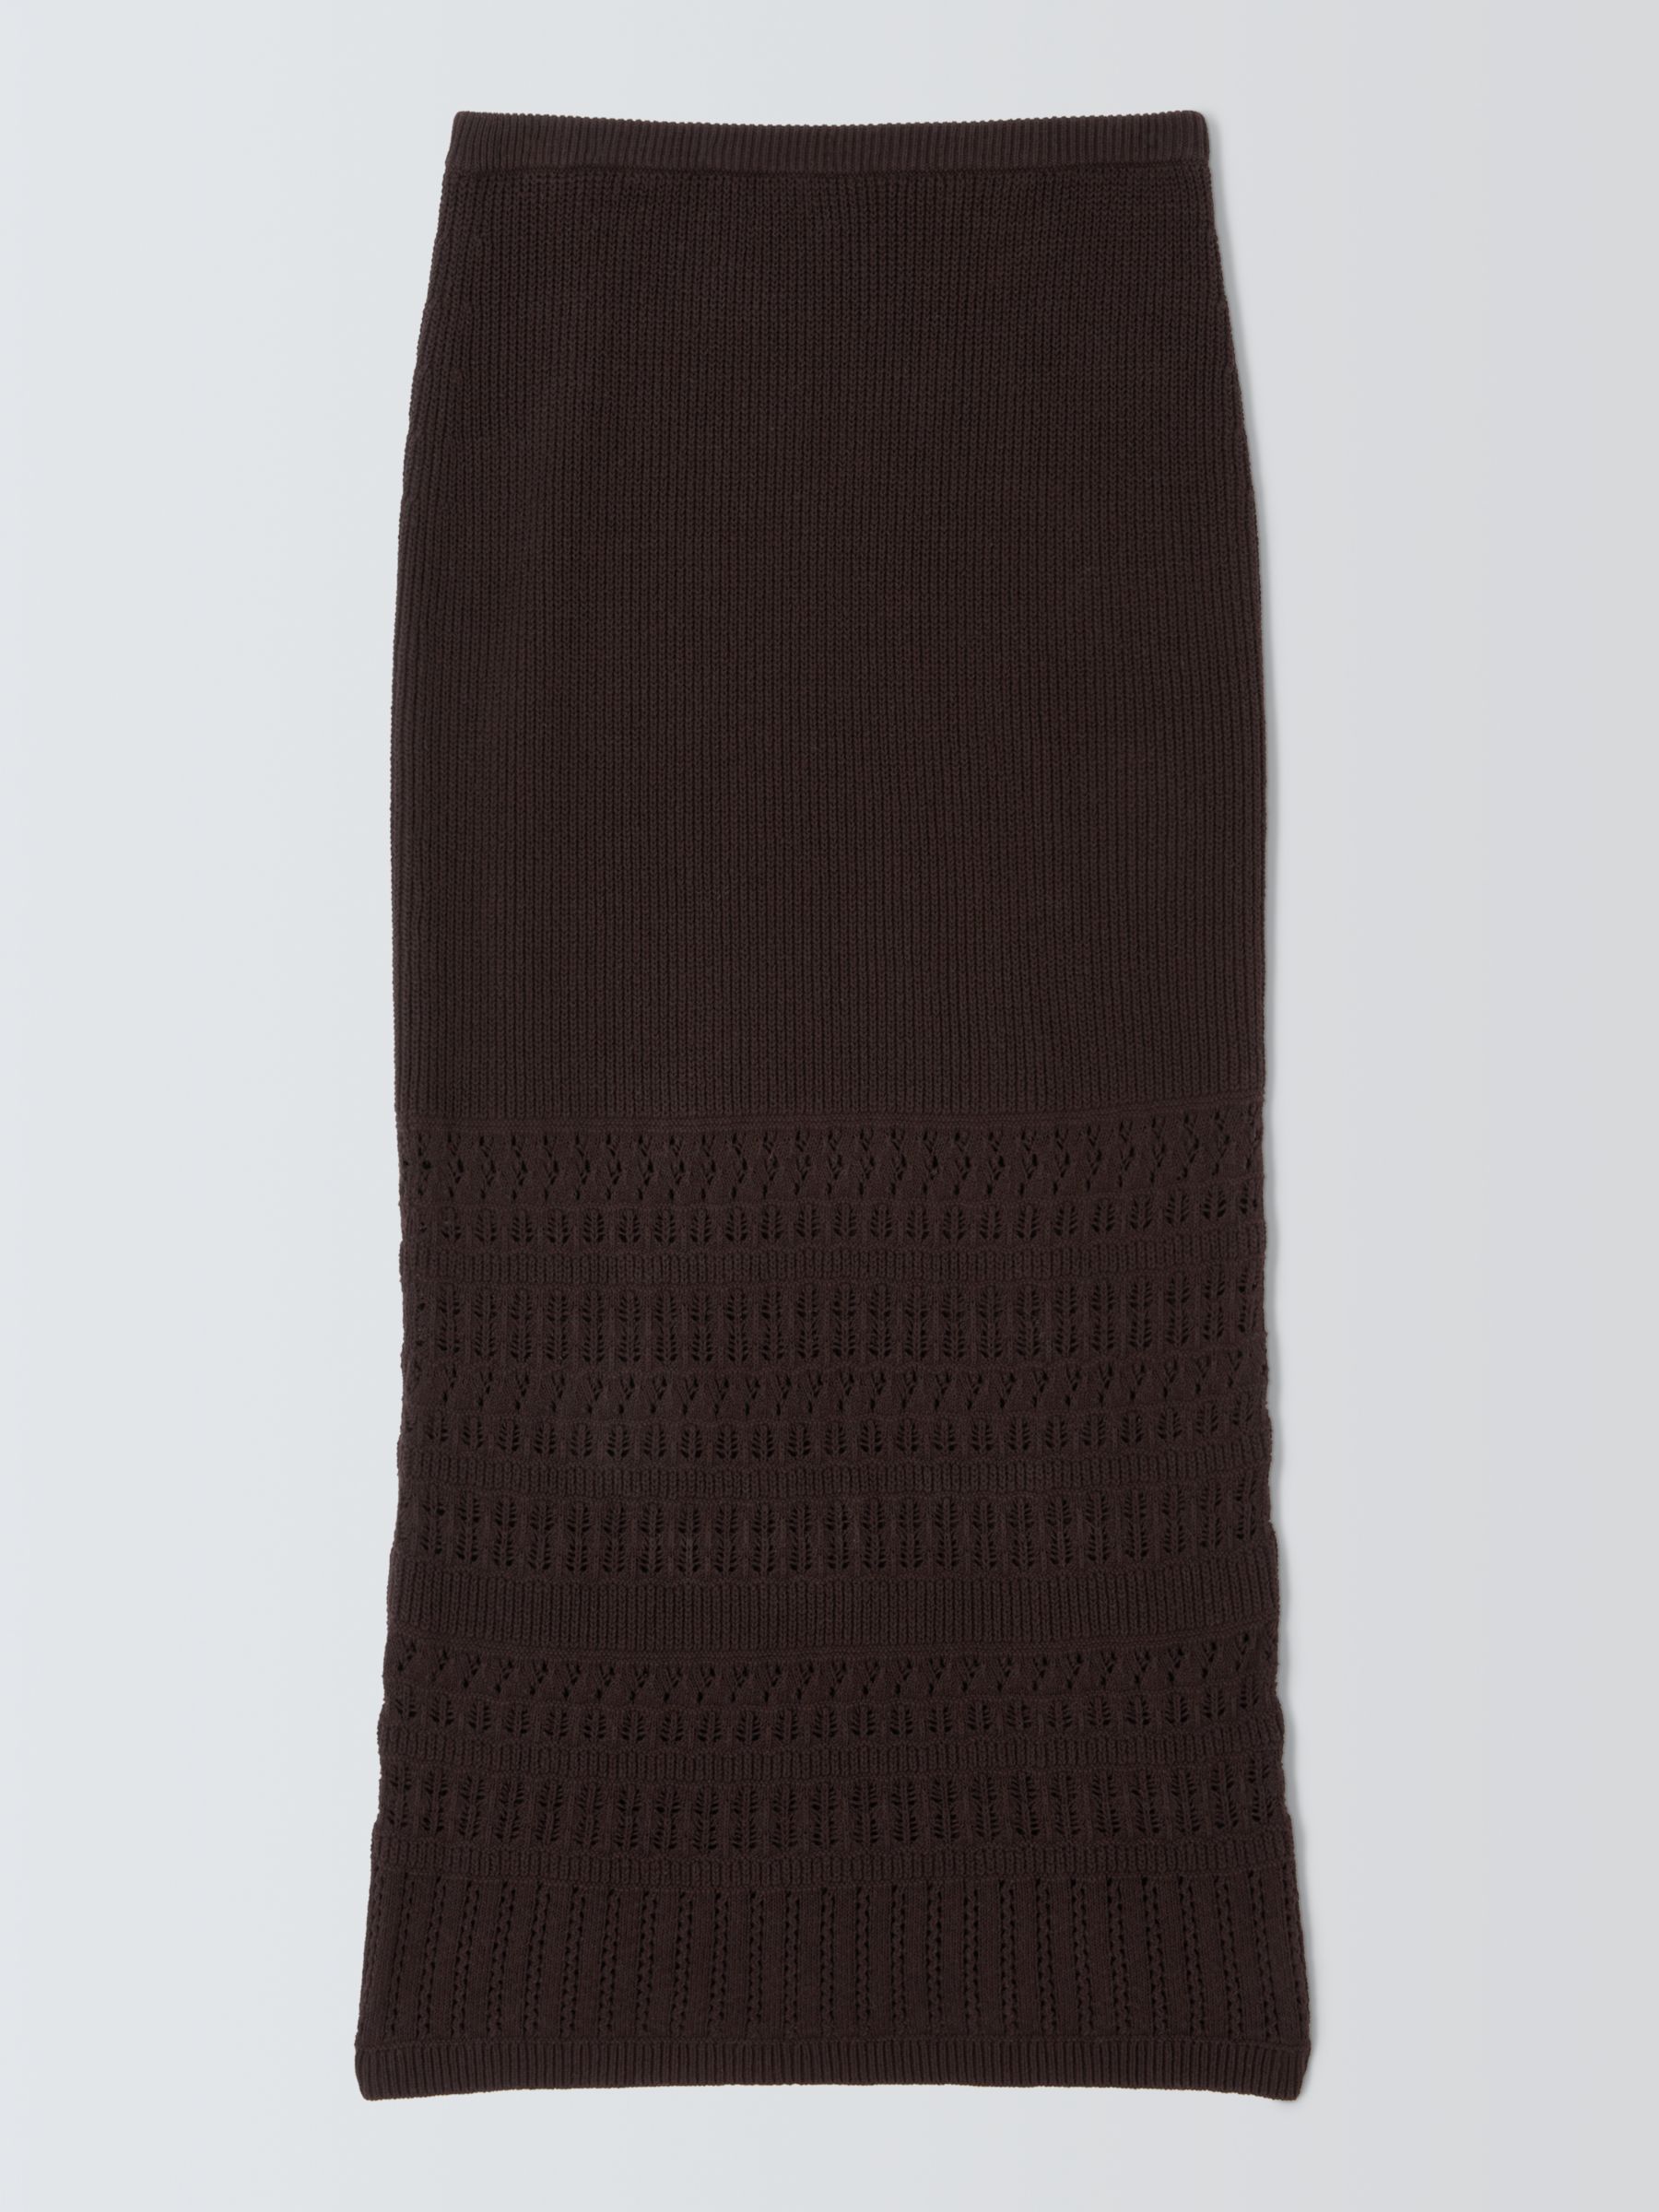 AND/OR Aria Knitted Maxi Skirt, Dark Chocolate, 8